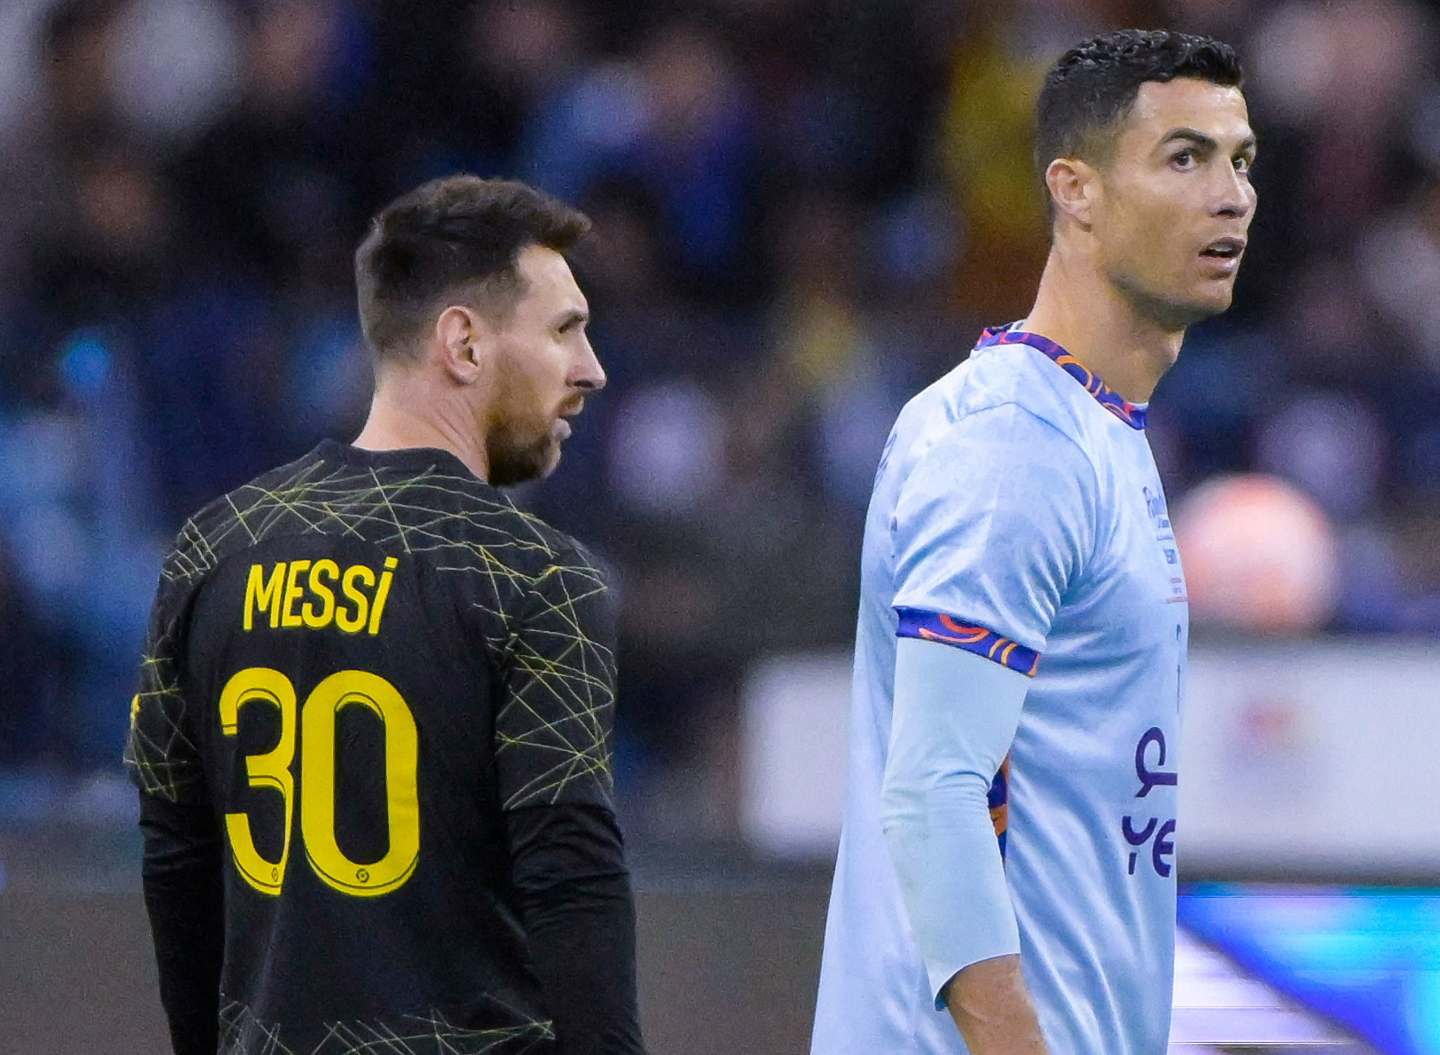 Lionel Messi equaled the huge record of Cristiano Ronaldo